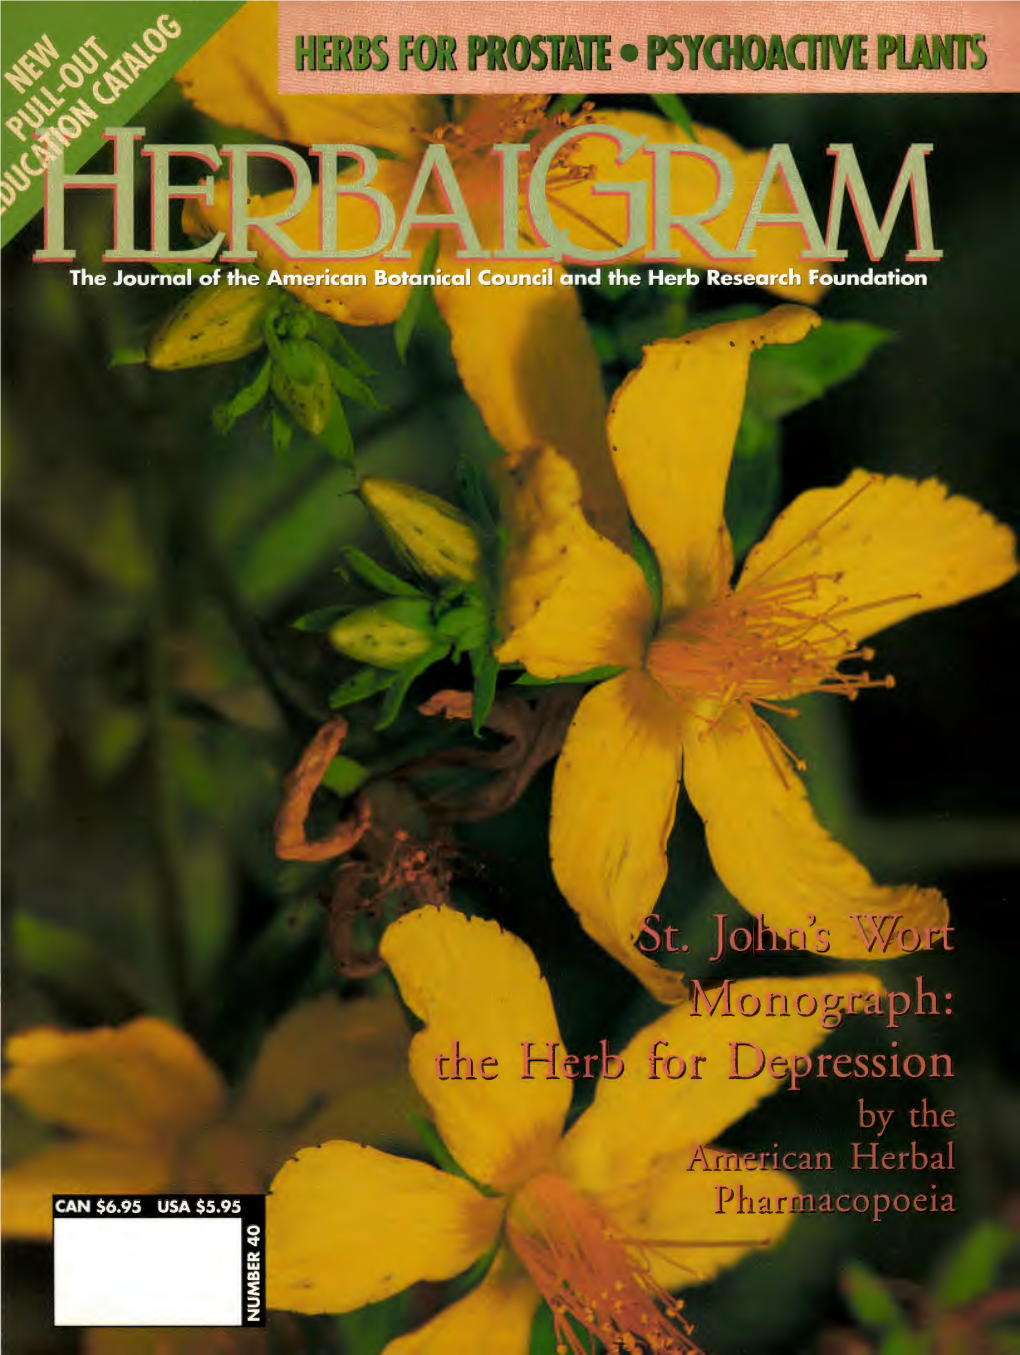 ADVISORY BOARDS Each Issue of Herbaigram Is Peer Reviewed by Various Members of Our Advisory Boards Prior to Publication